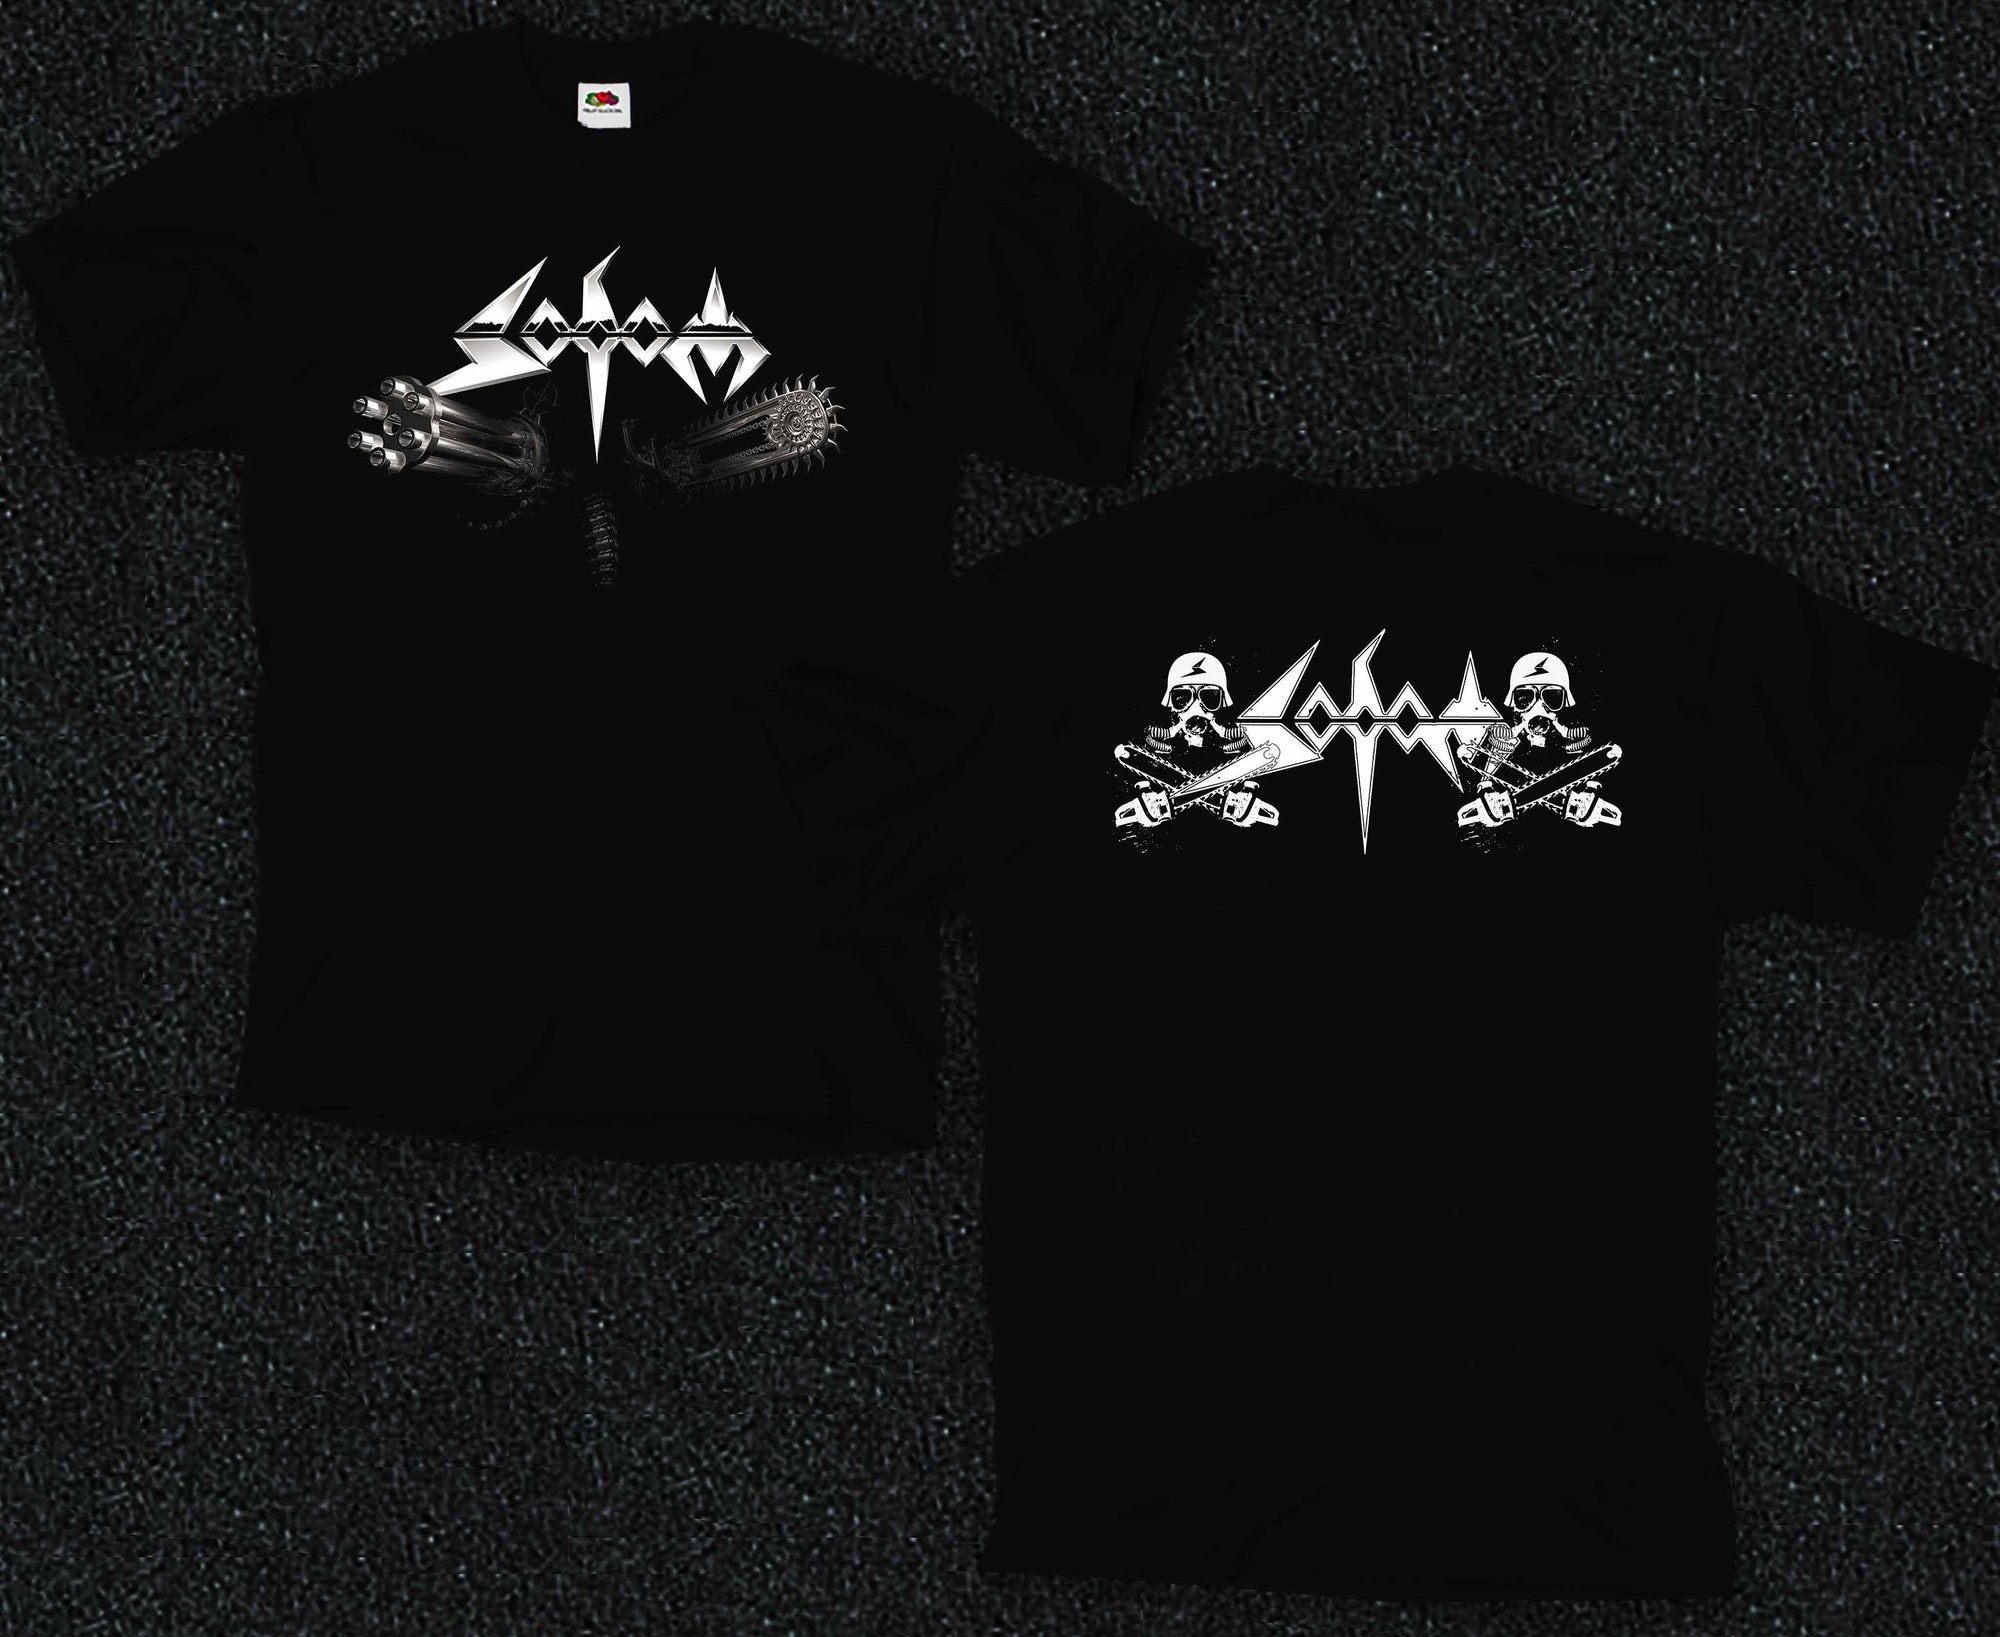 SODOM - Axis of Evil t-shirt